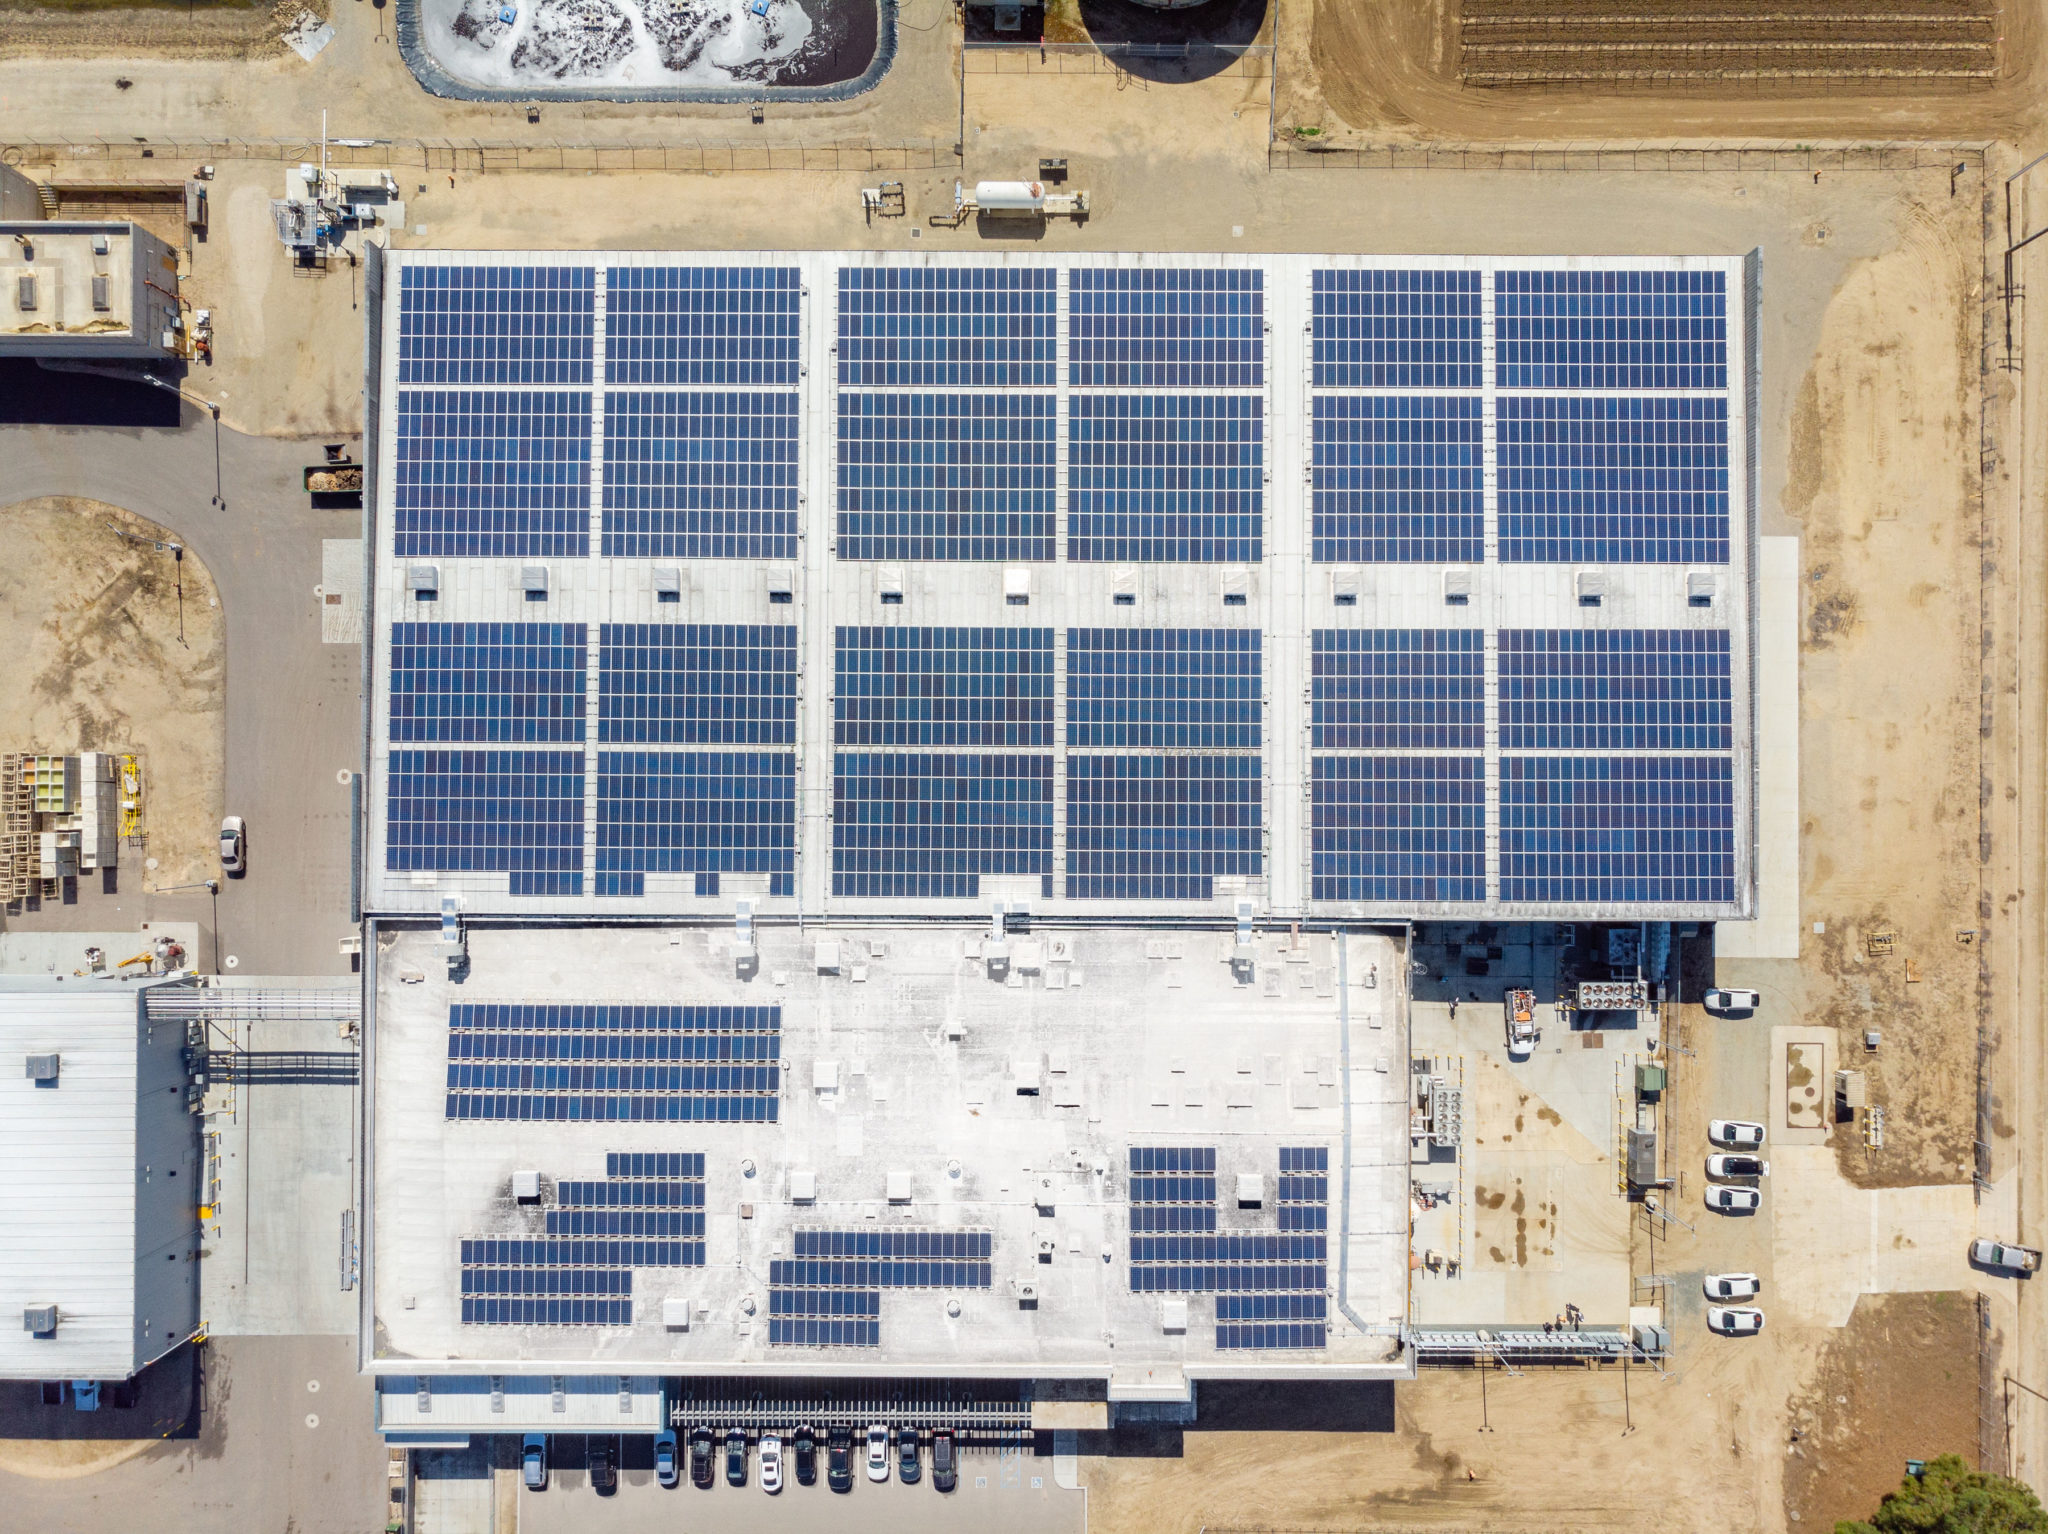 Aerial view of the solar panels on the J Lohr Vineyards & Wines building in Paso Robles, California.